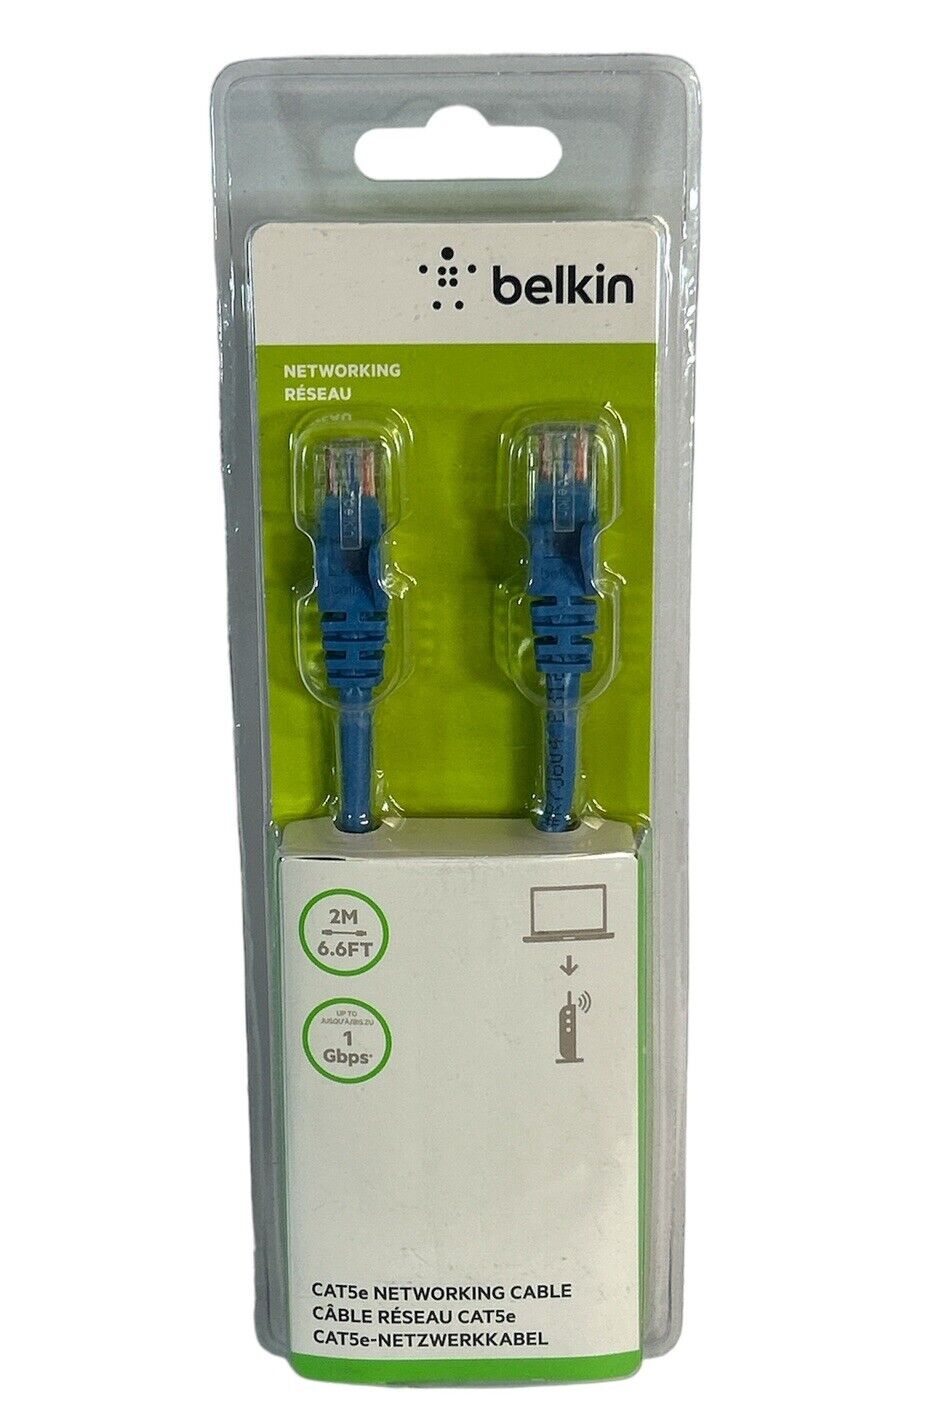 Belkin Cat5e Networking Cable 2M 6.6ft Blue Ethernet Cable Up To 1 Gbps NEW